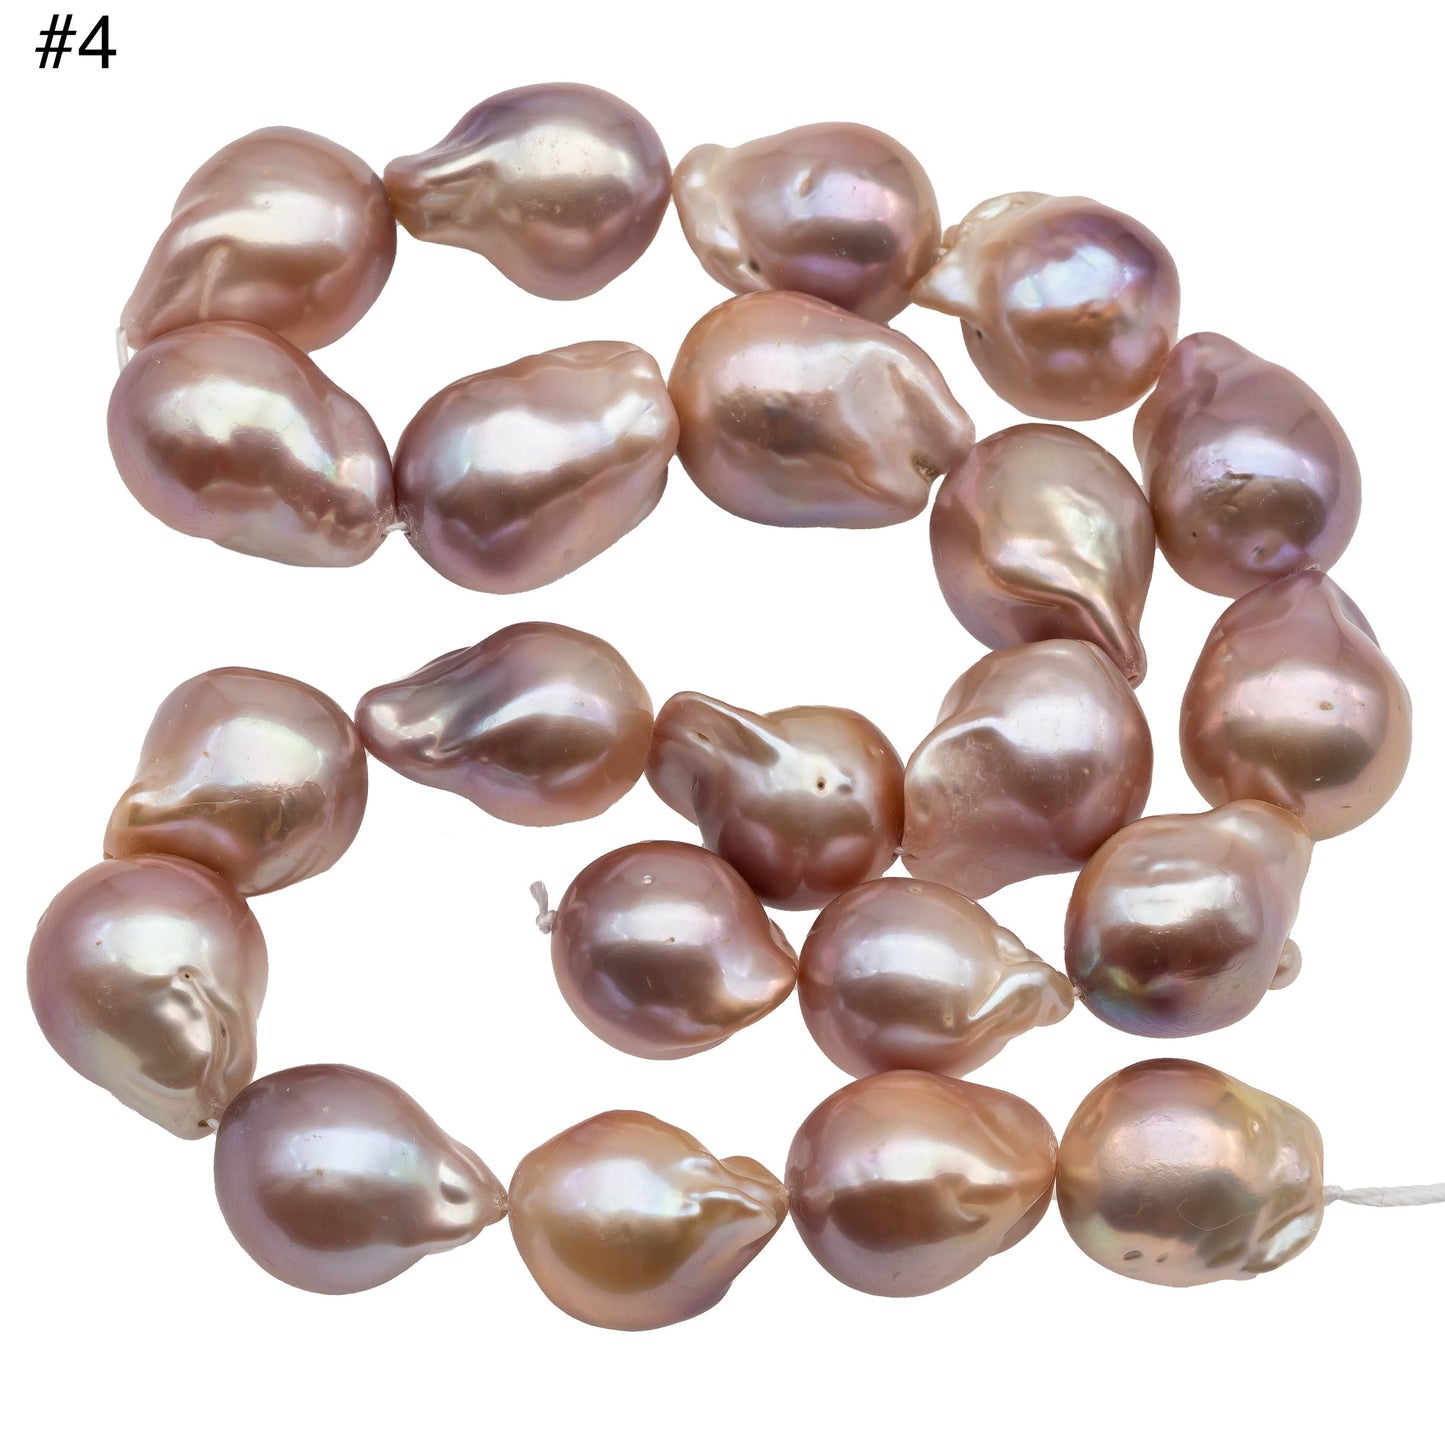 Pink Baroque Pearl in Natural Color Freshwater Pearl Flameball Beads, High Luster and Large Size in Full Strand, 13-17mm, SKU# 1121BA